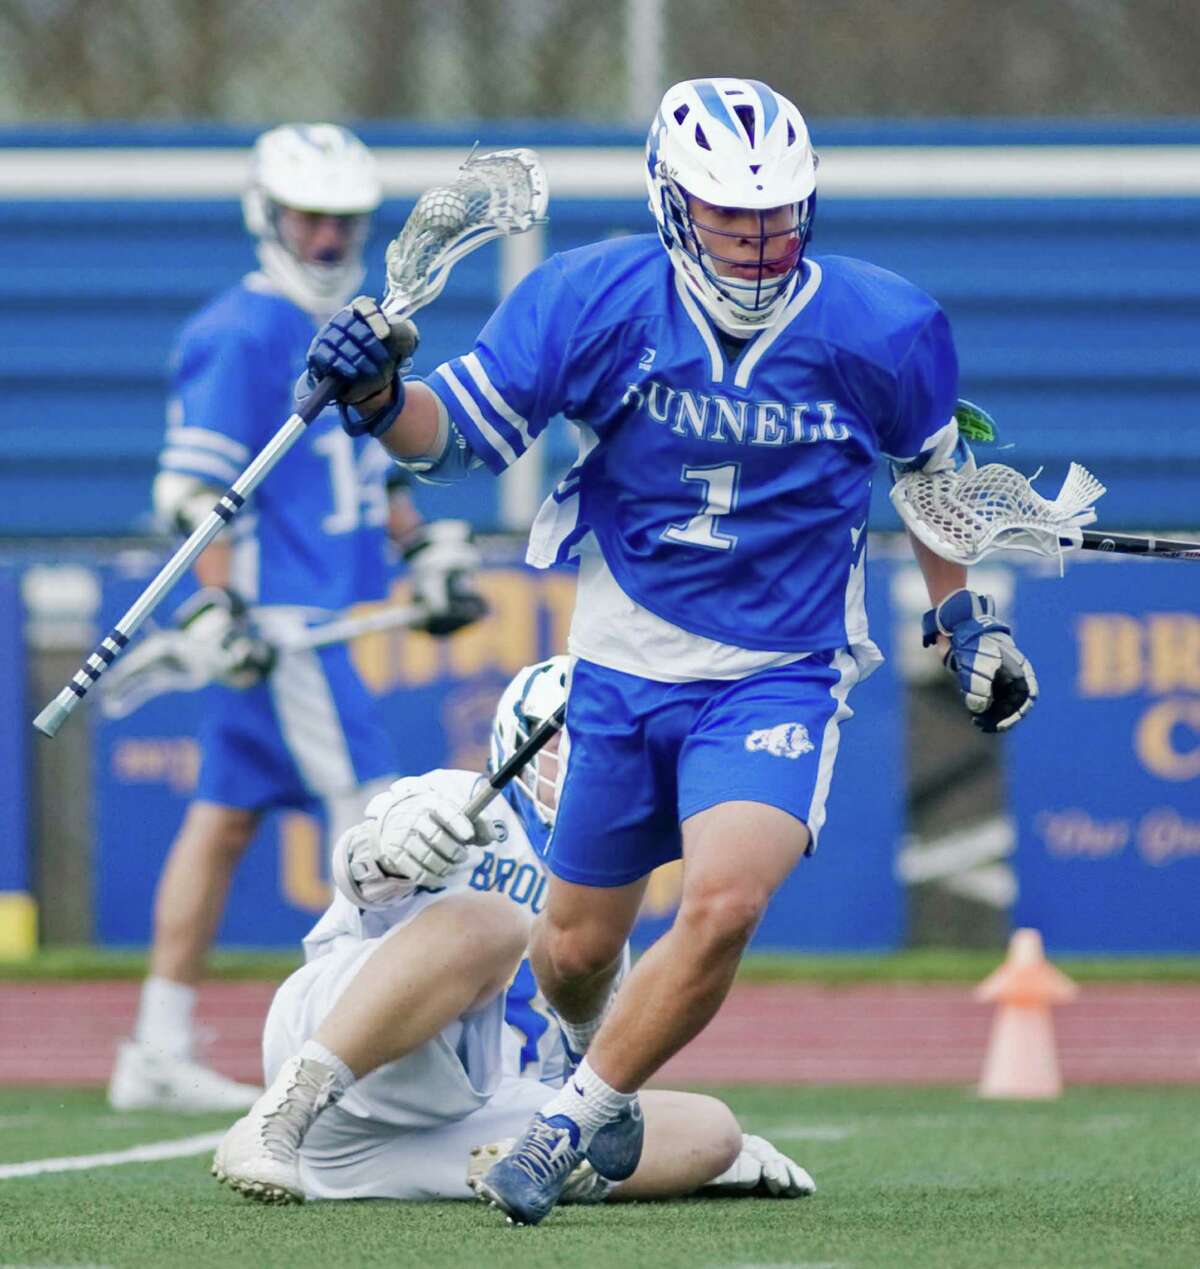 Bunnell High School's Jarrod Davis carries the ball during a game against Brookfield High School, played at Brookfield. Monday, May 2, 2016